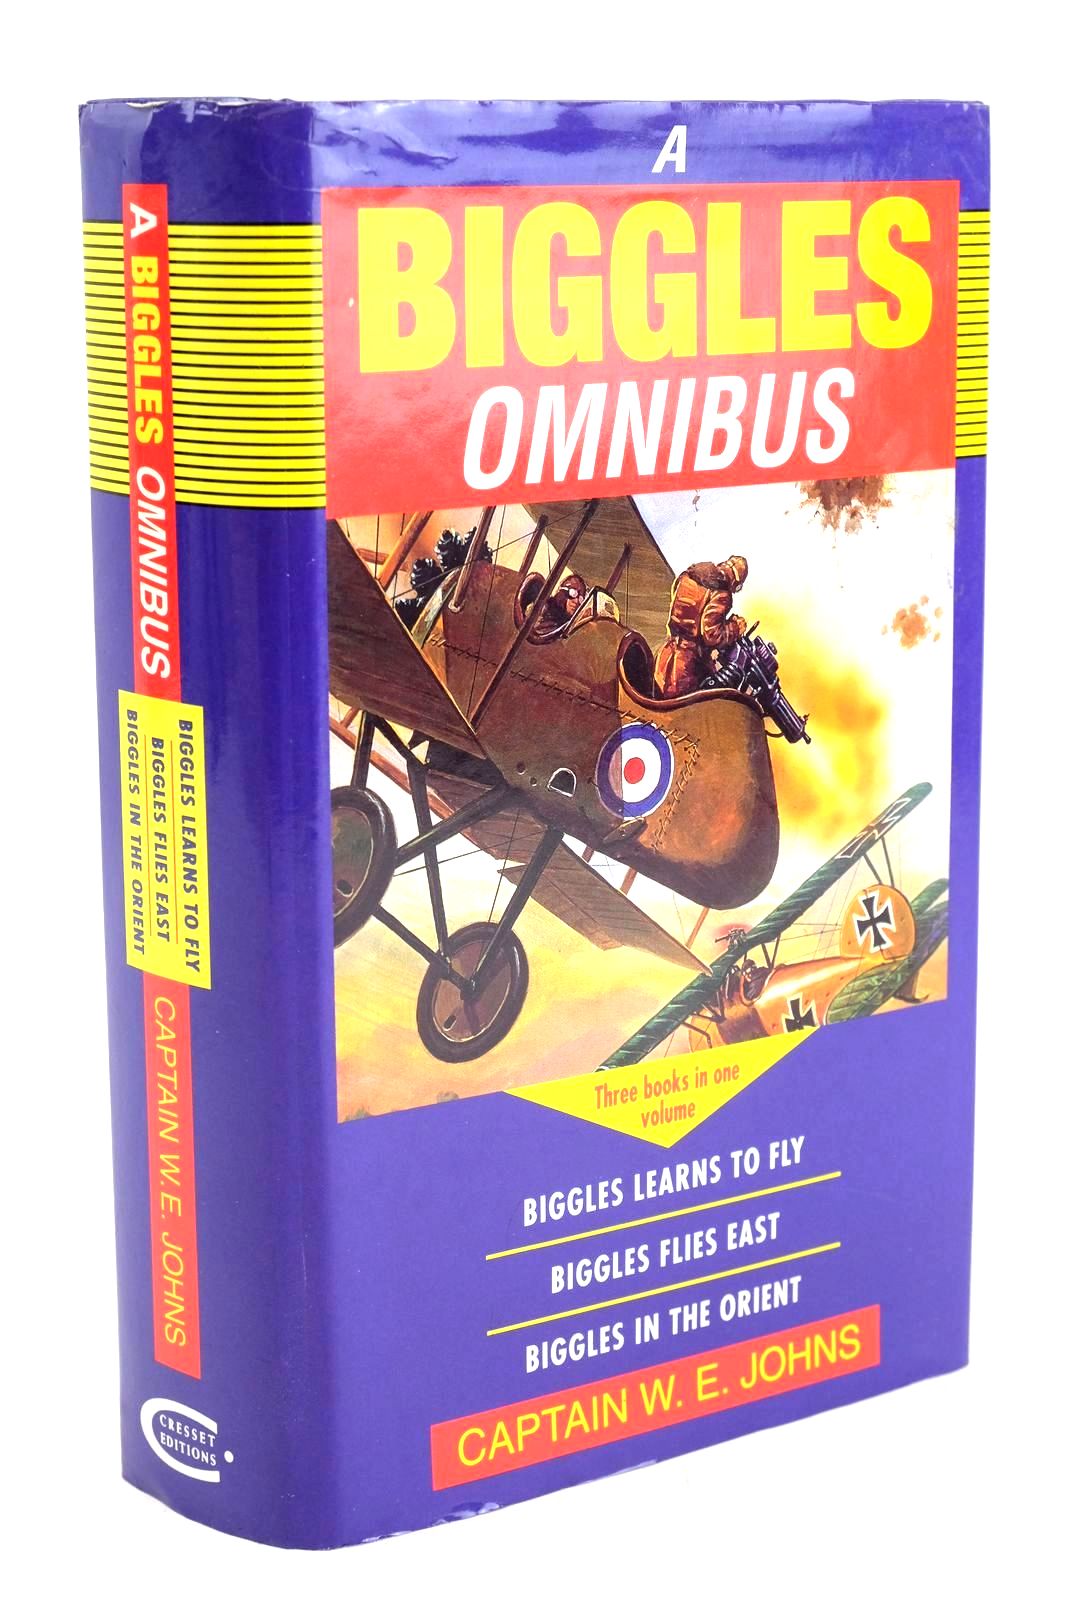 Photo of A BIGGLES OMNIBUS written by Johns, W.E. published by Cresset Editions (STOCK CODE: 1326605)  for sale by Stella & Rose's Books